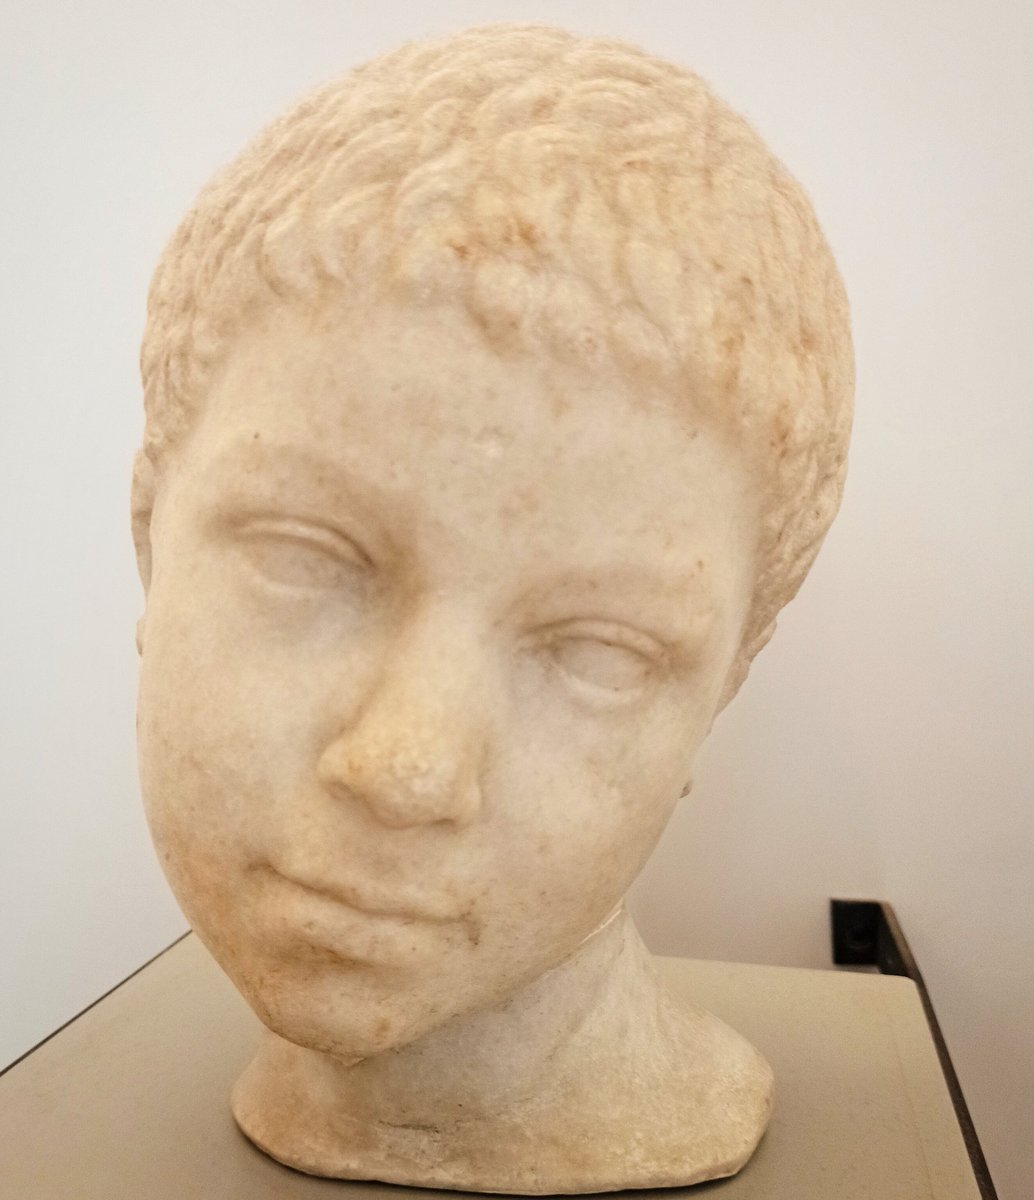 Portrait of a boy, workshop from the Greek islands, late 2nd century BC, Pietro Pesaro collection, on display in room 13 #museum #Venice #Archaeology #Greece #collection #art #portrait